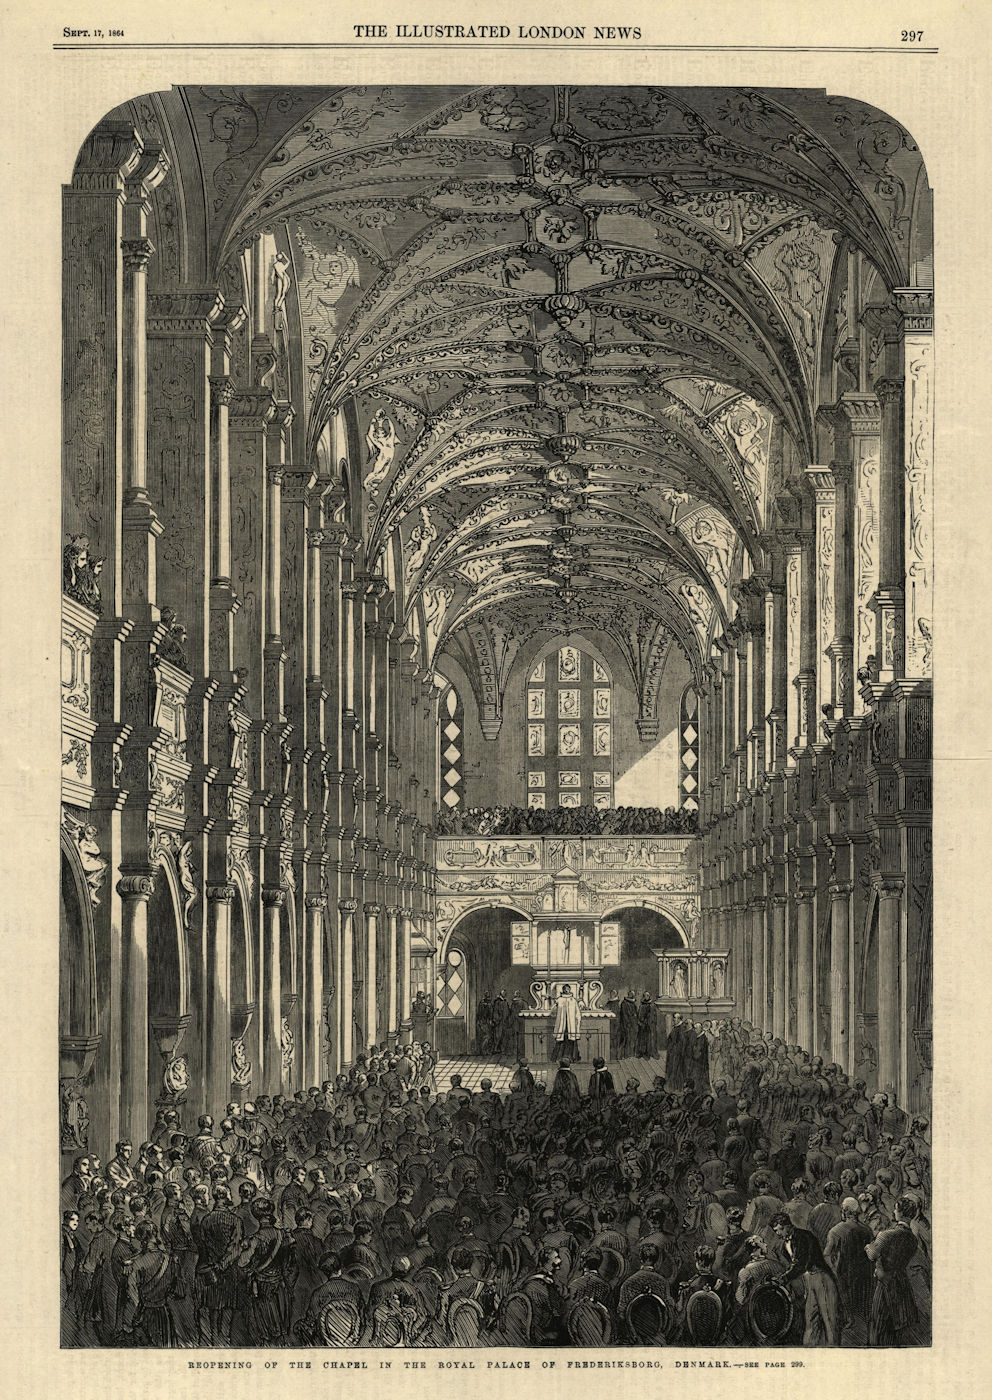 Associate Product Reopening of the Chapel in the royal palace of Frederiksborg, Denmark 1864